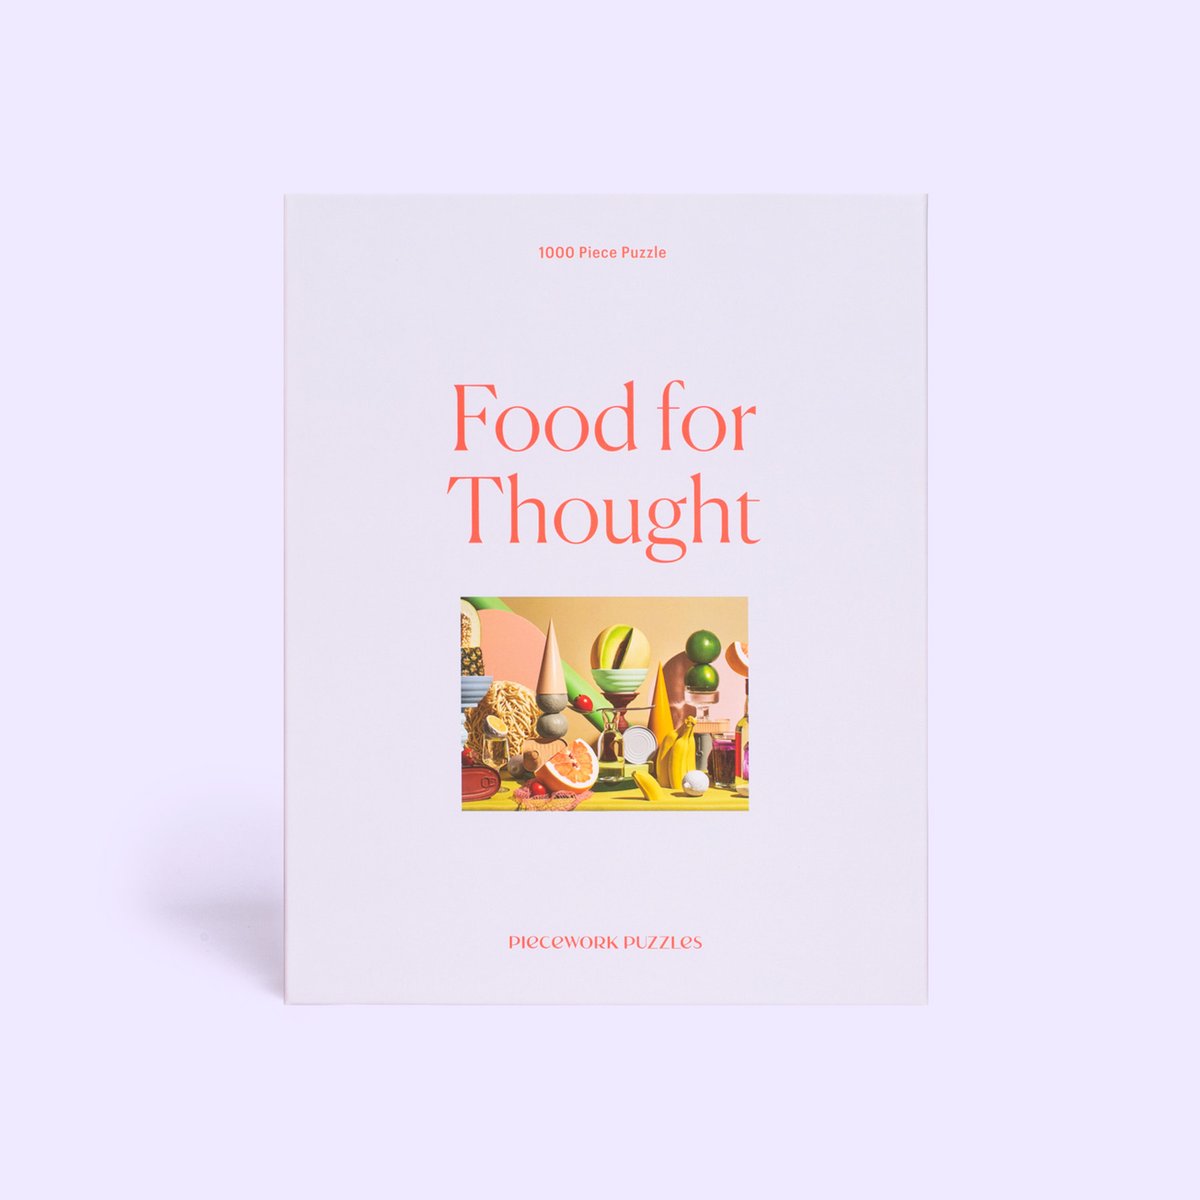 Food for Thought | 1,000 Piece Jigsaw Puzzle Piecework Puzzles Puzzledly.